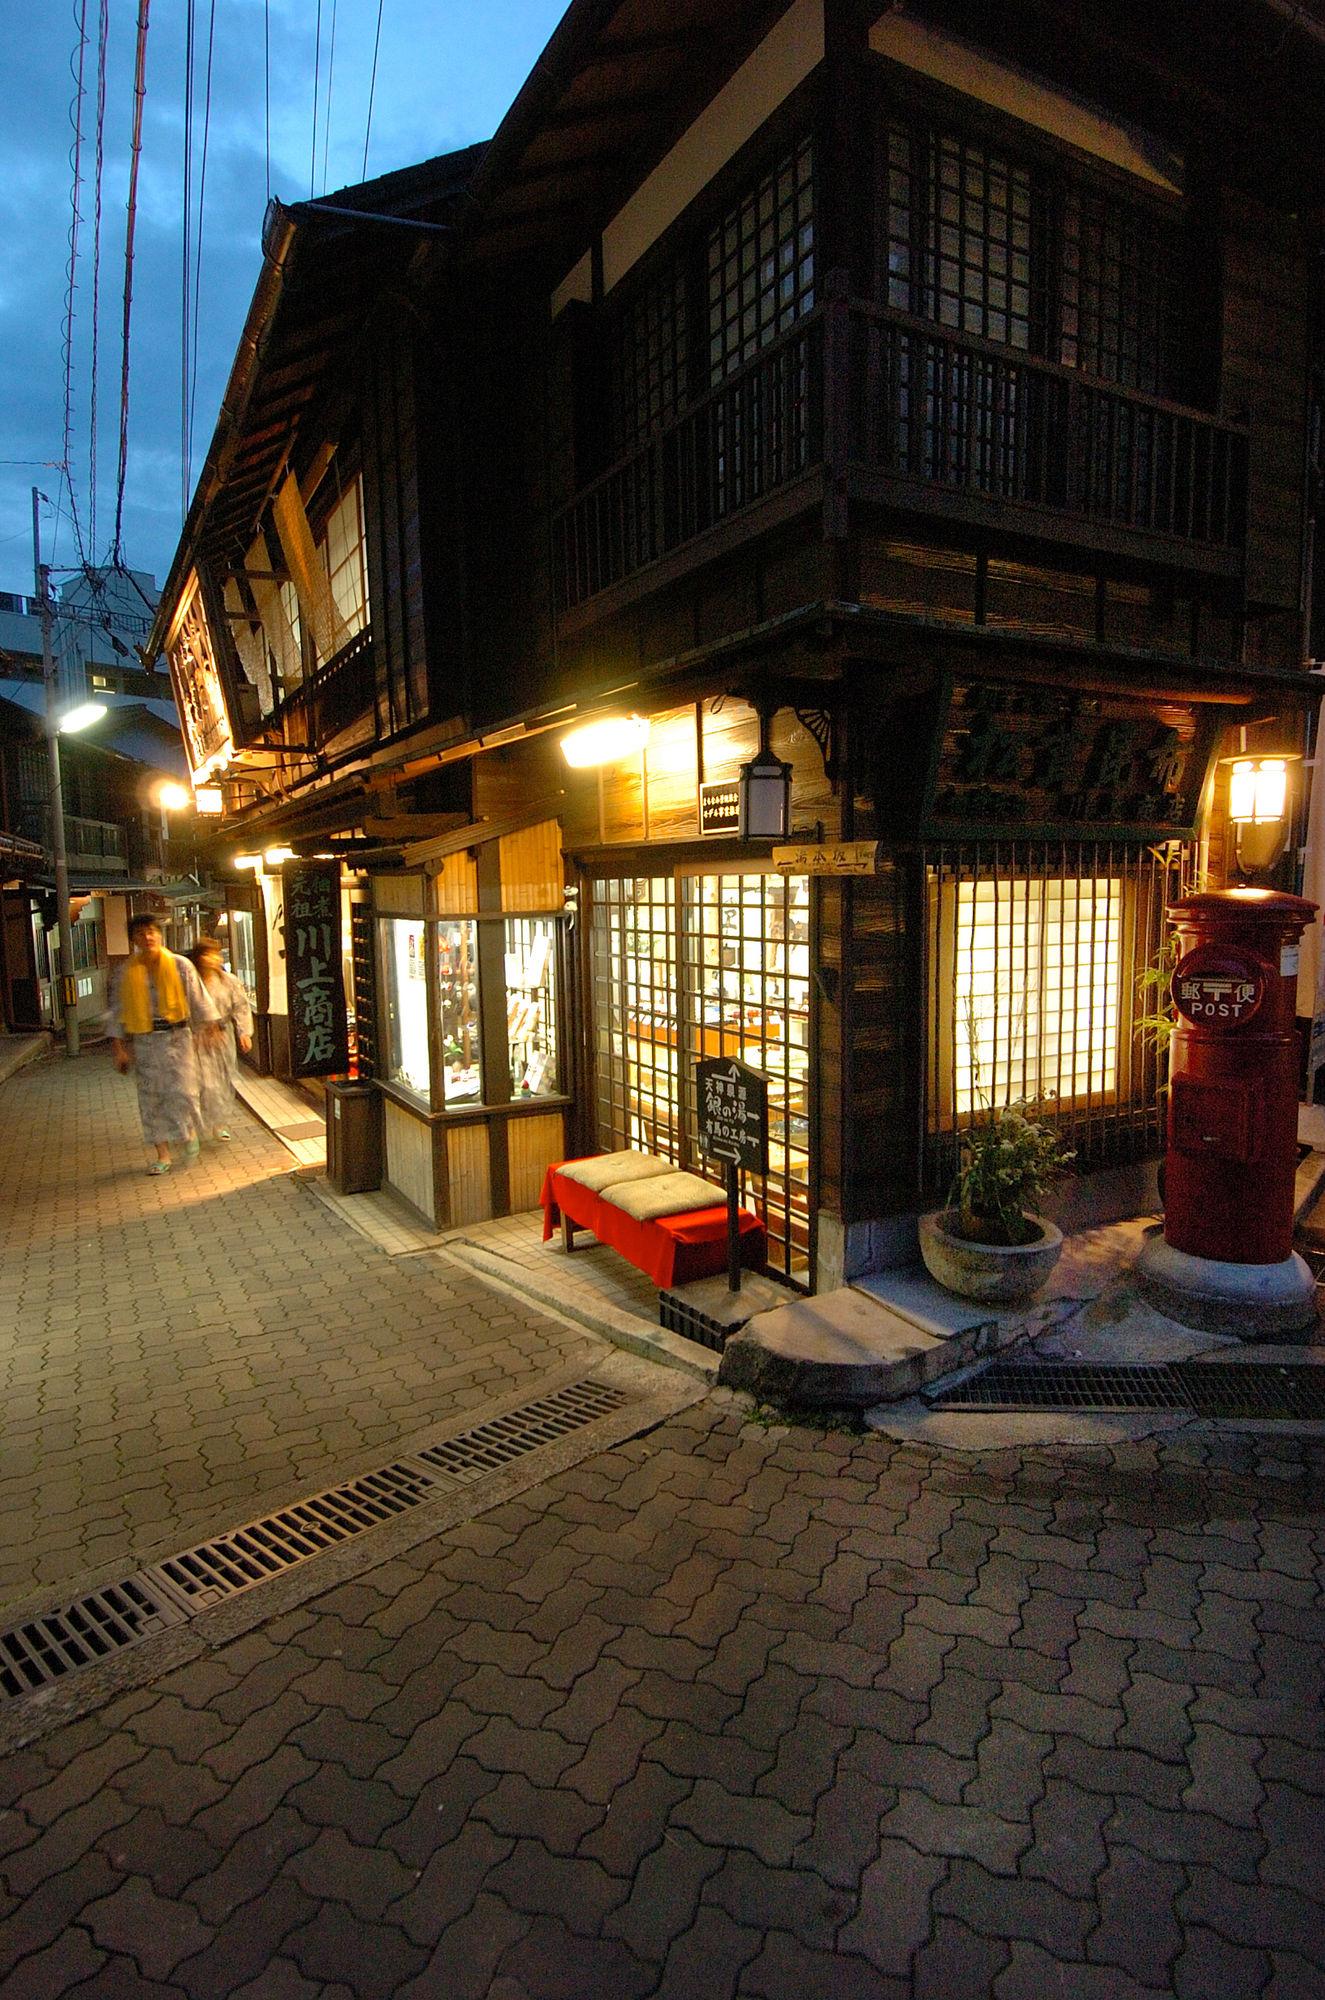 Cover image of this place Arima Onsen (有馬温泉)